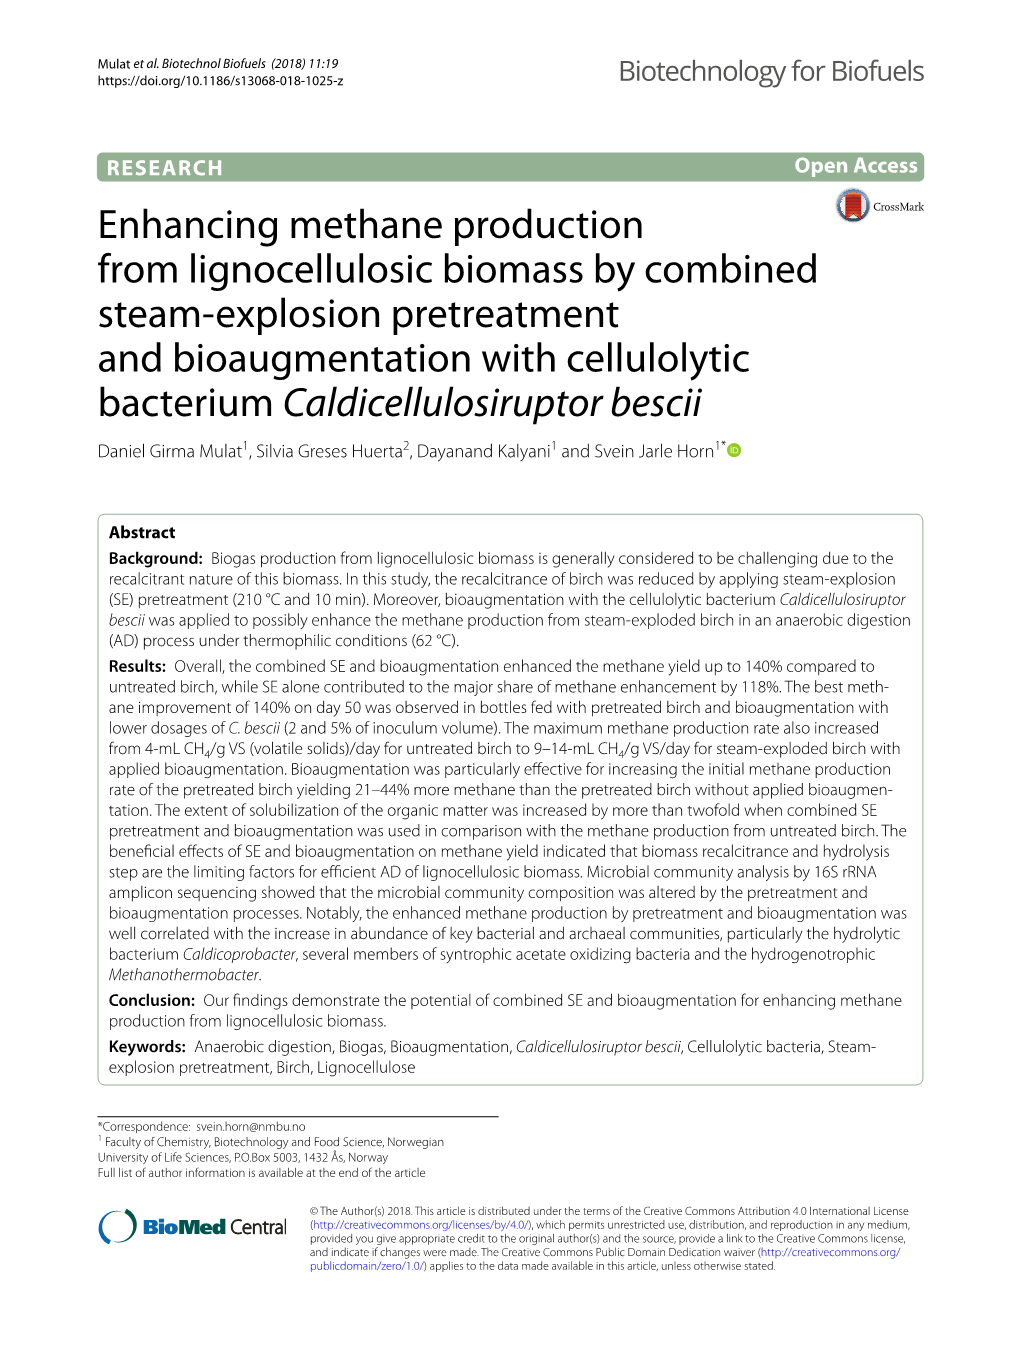 Enhancing Methane Production from Lignocellulosic Biomass By